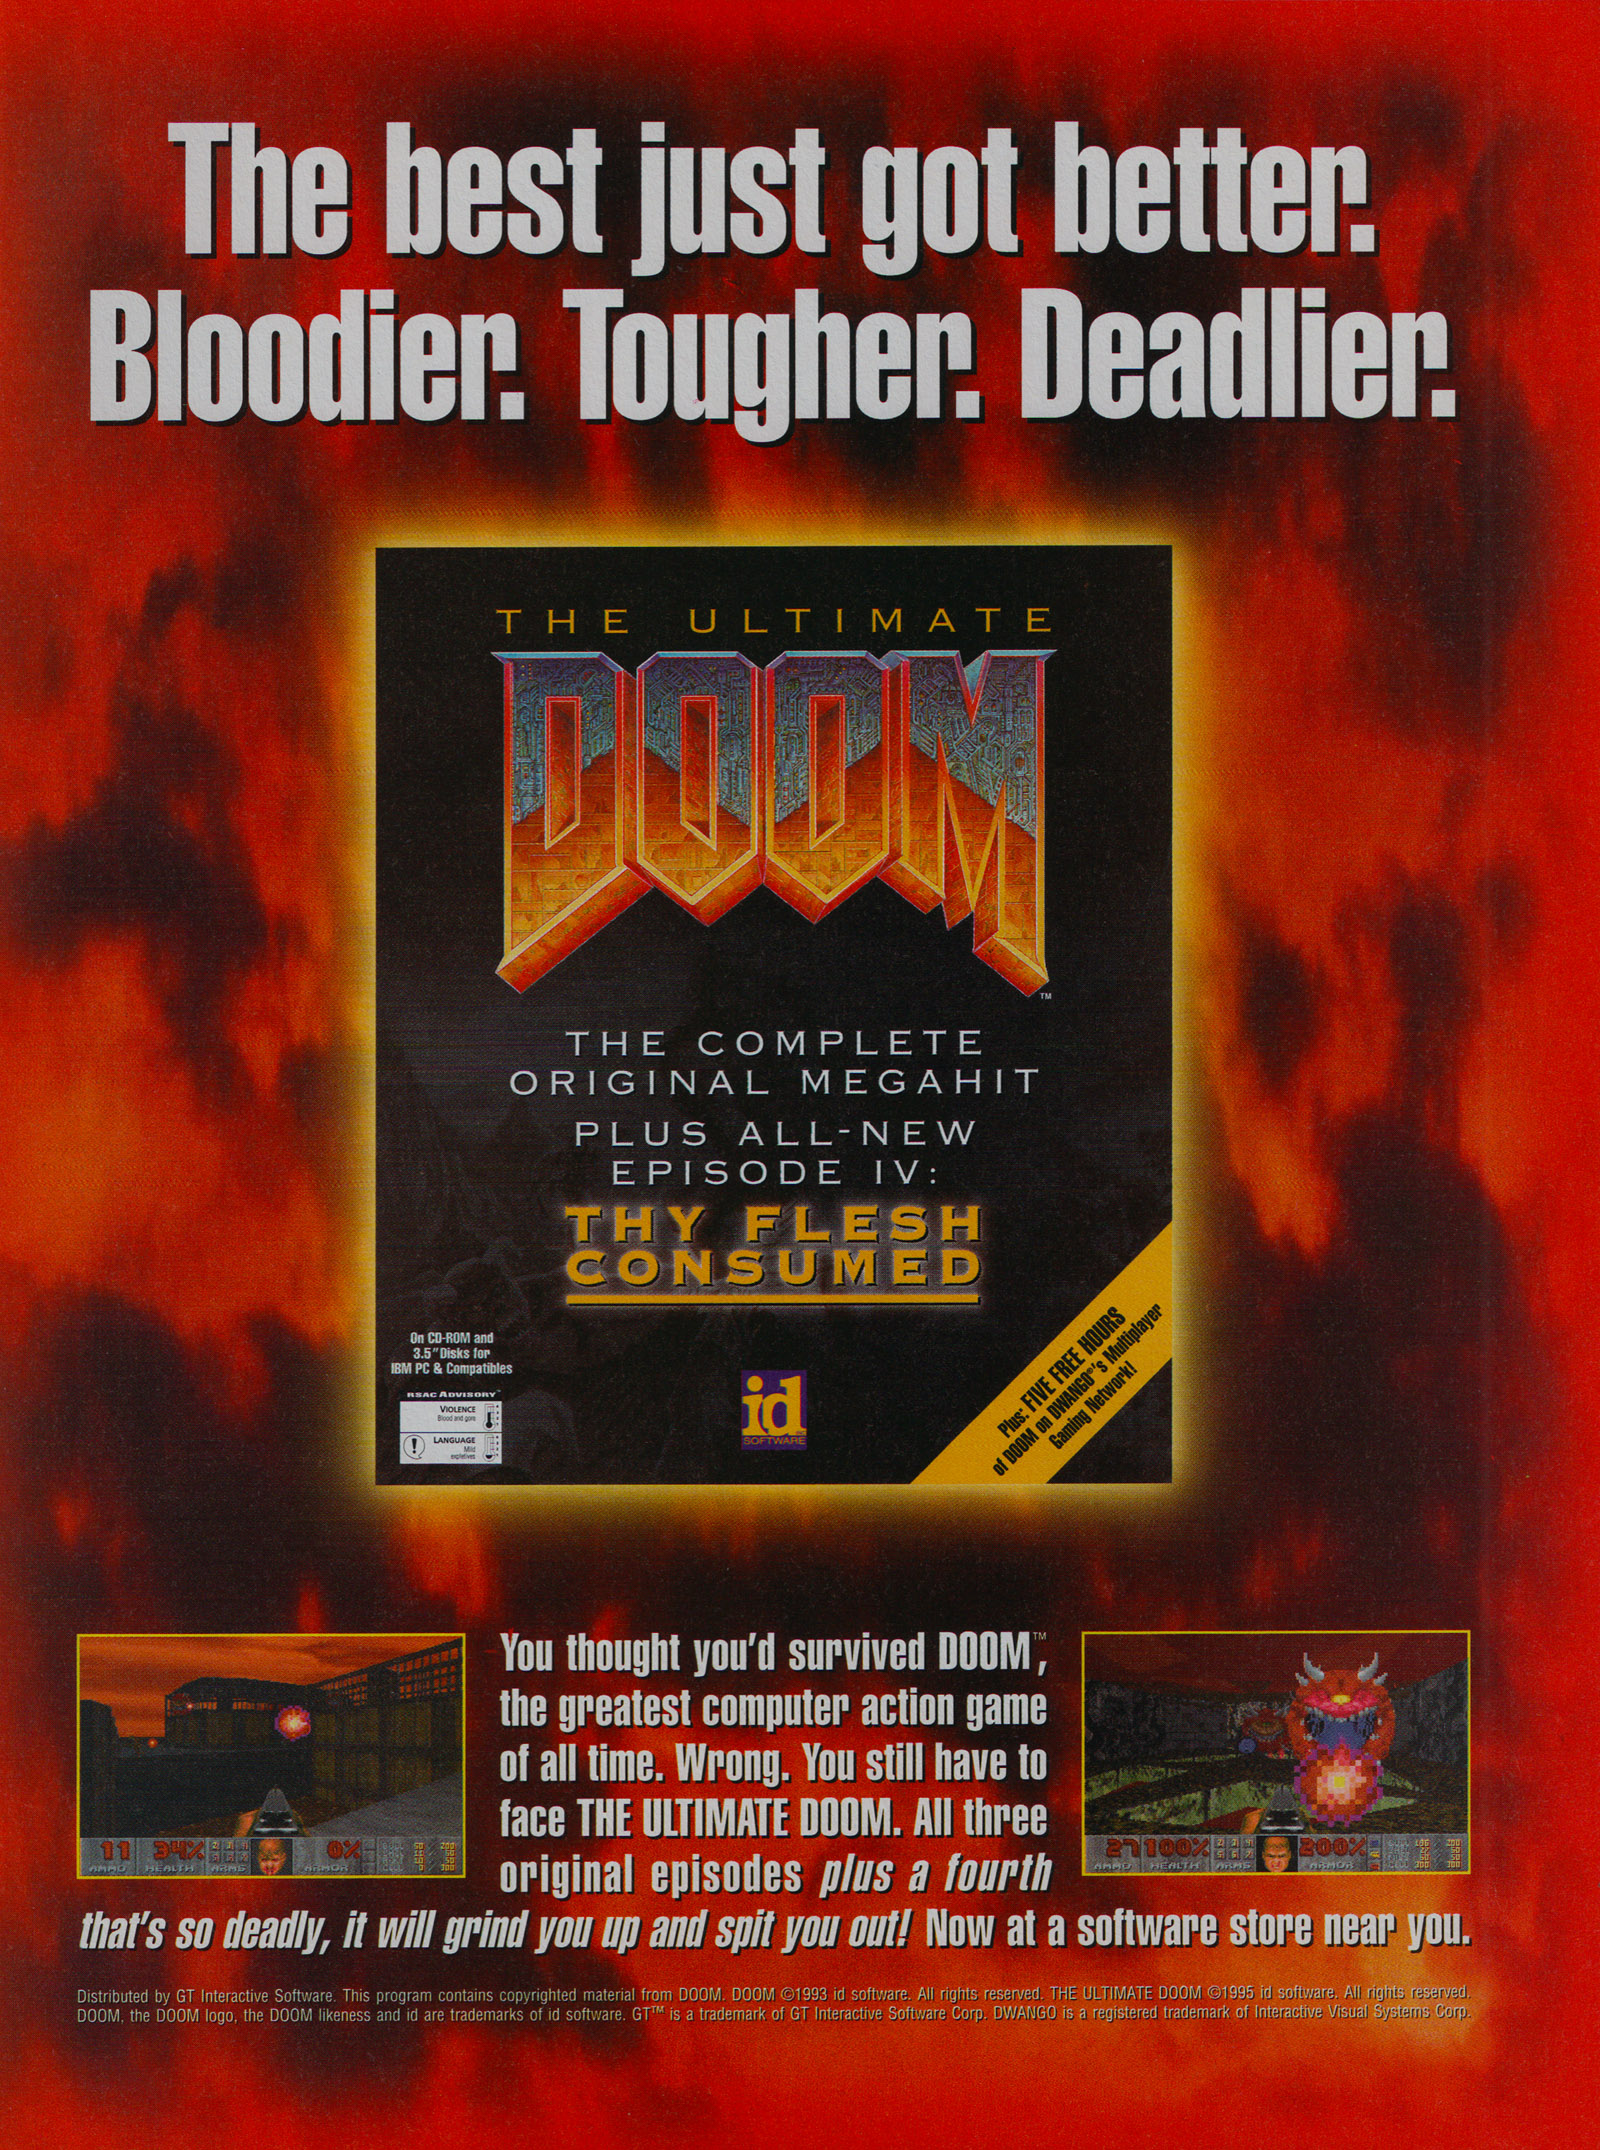 Avenge your rabbit friend (seriously) in this fourth episode of Doom The Ultimate Doom was the 1995 re-release of Doom (post-Doom II) which added an extra episode called Thy Flesh […]